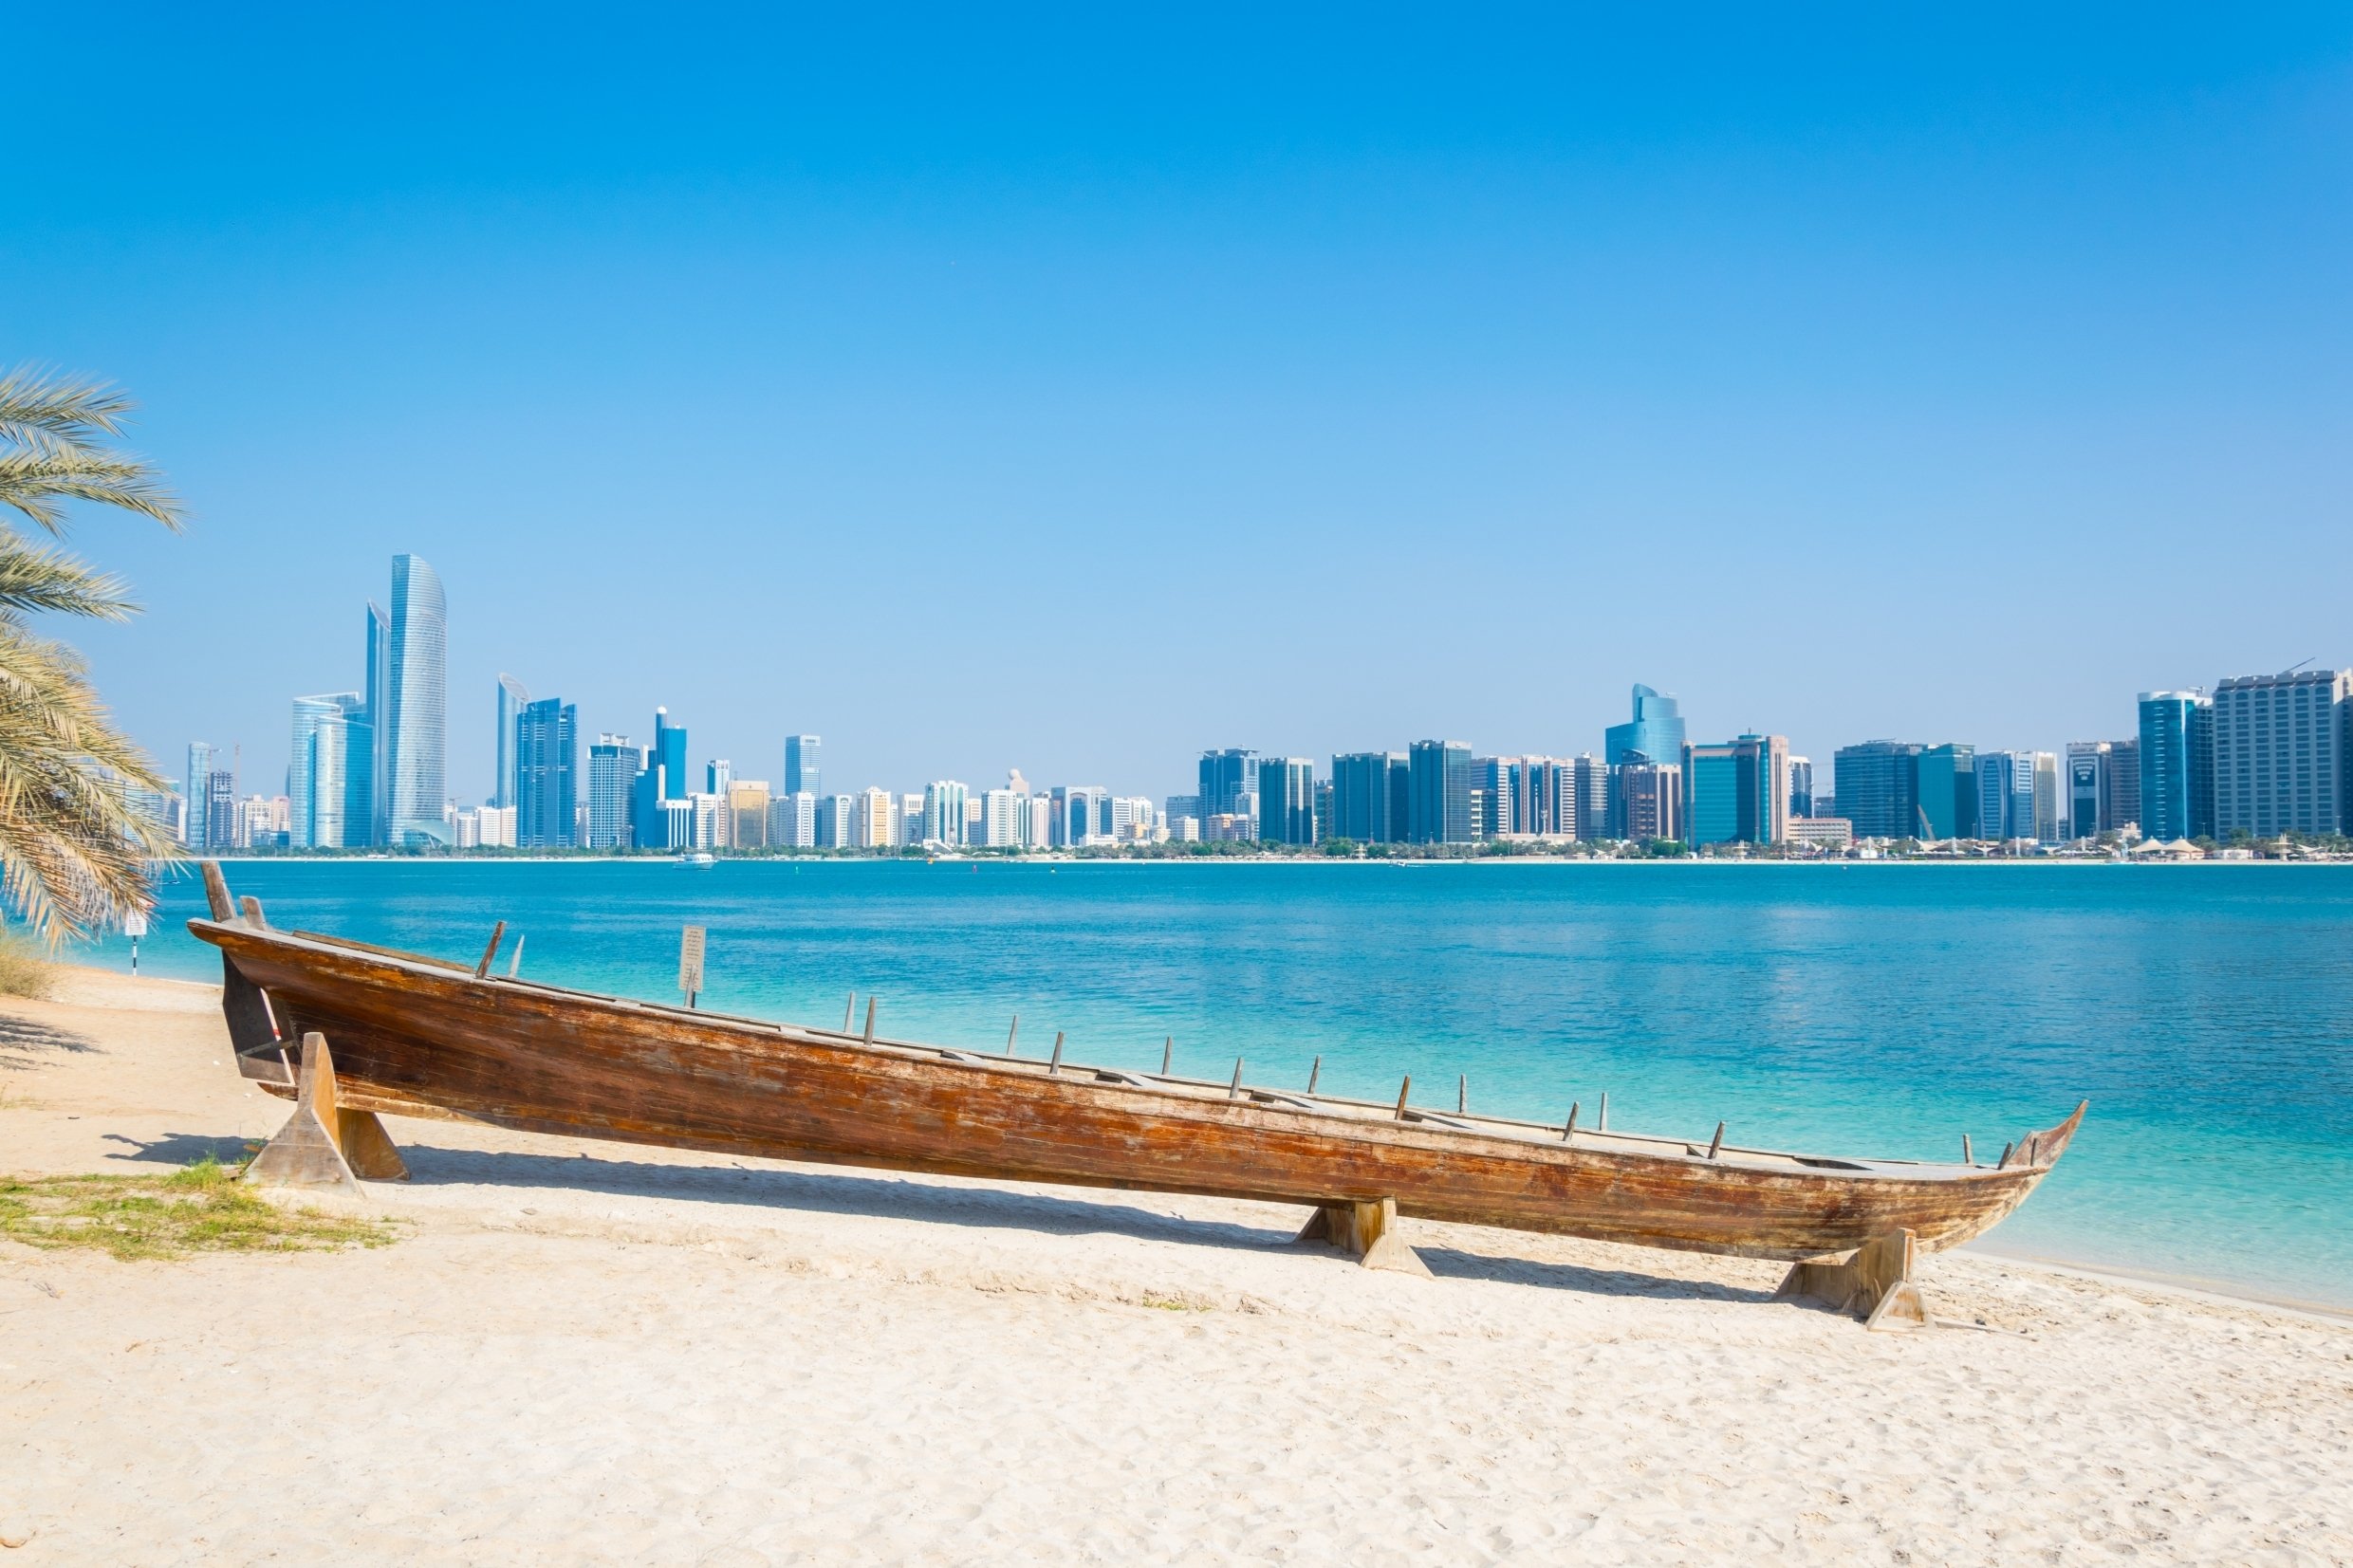 Relax At The Abu Dhabi Beaches On The 13 Day Israel, Jordan, Dubai And Abu Dhabi Package Tour